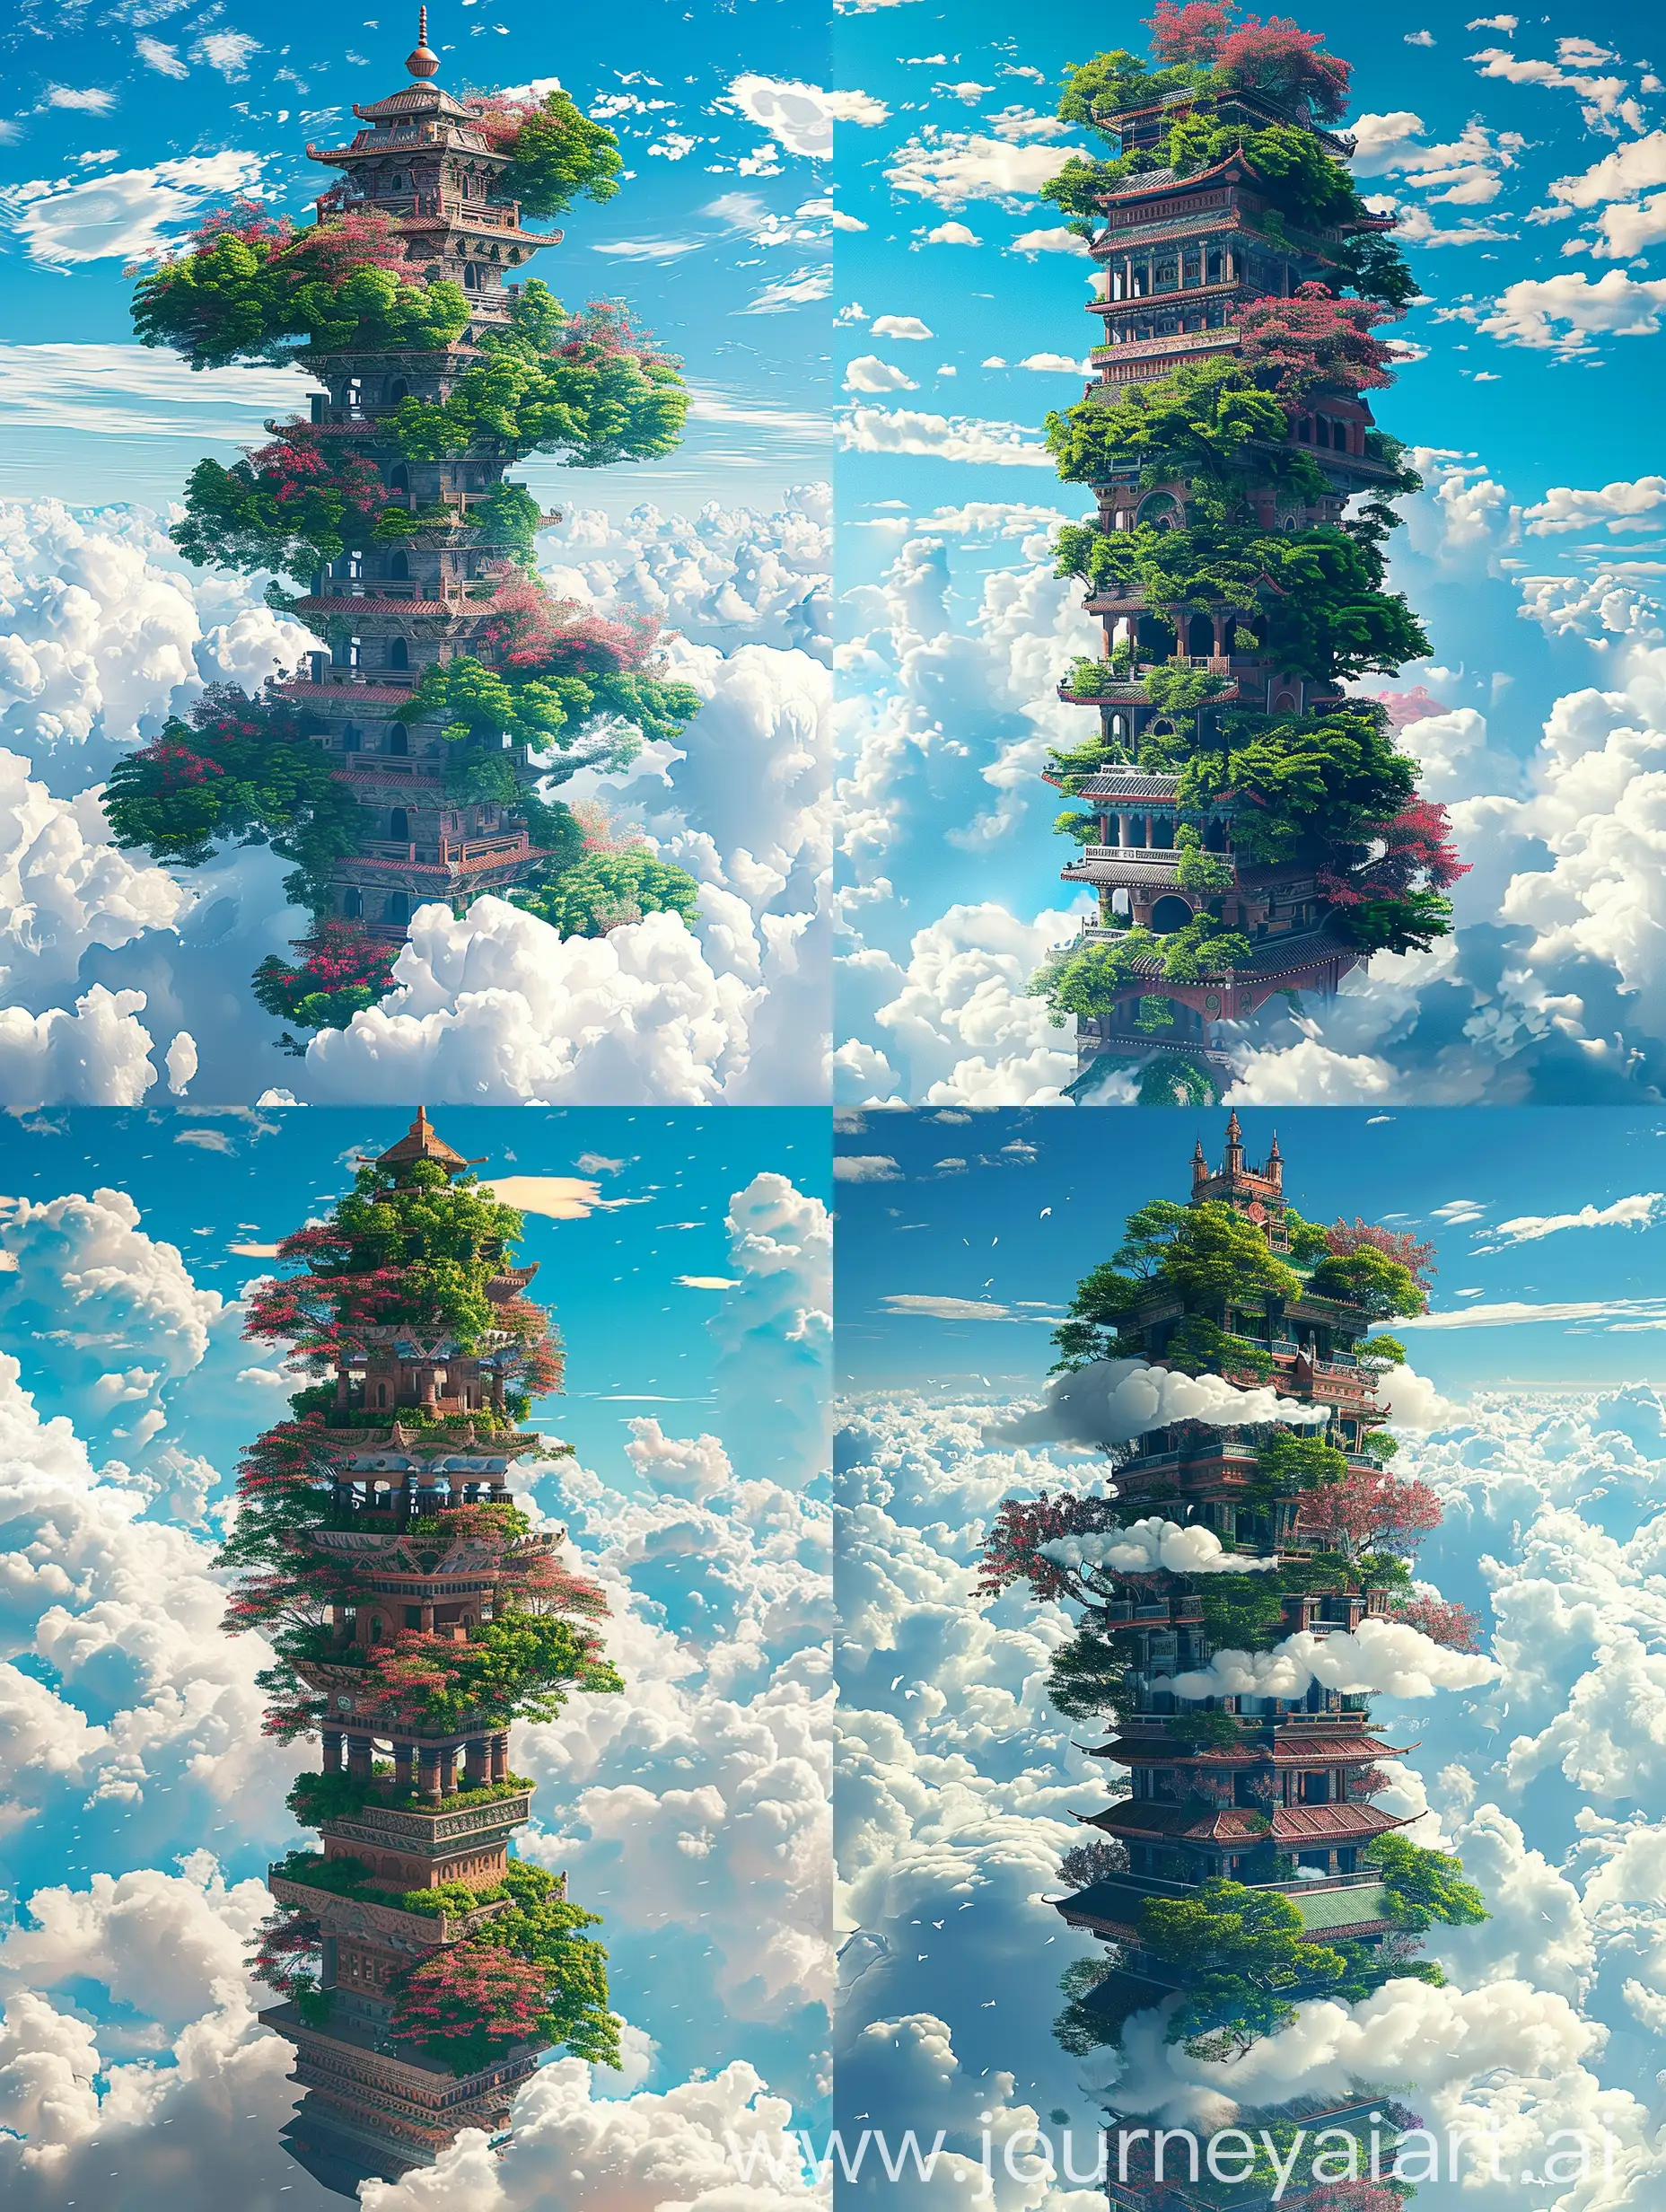 Majestic-Tower-with-Lush-Gardens-and-Dreamy-Sky